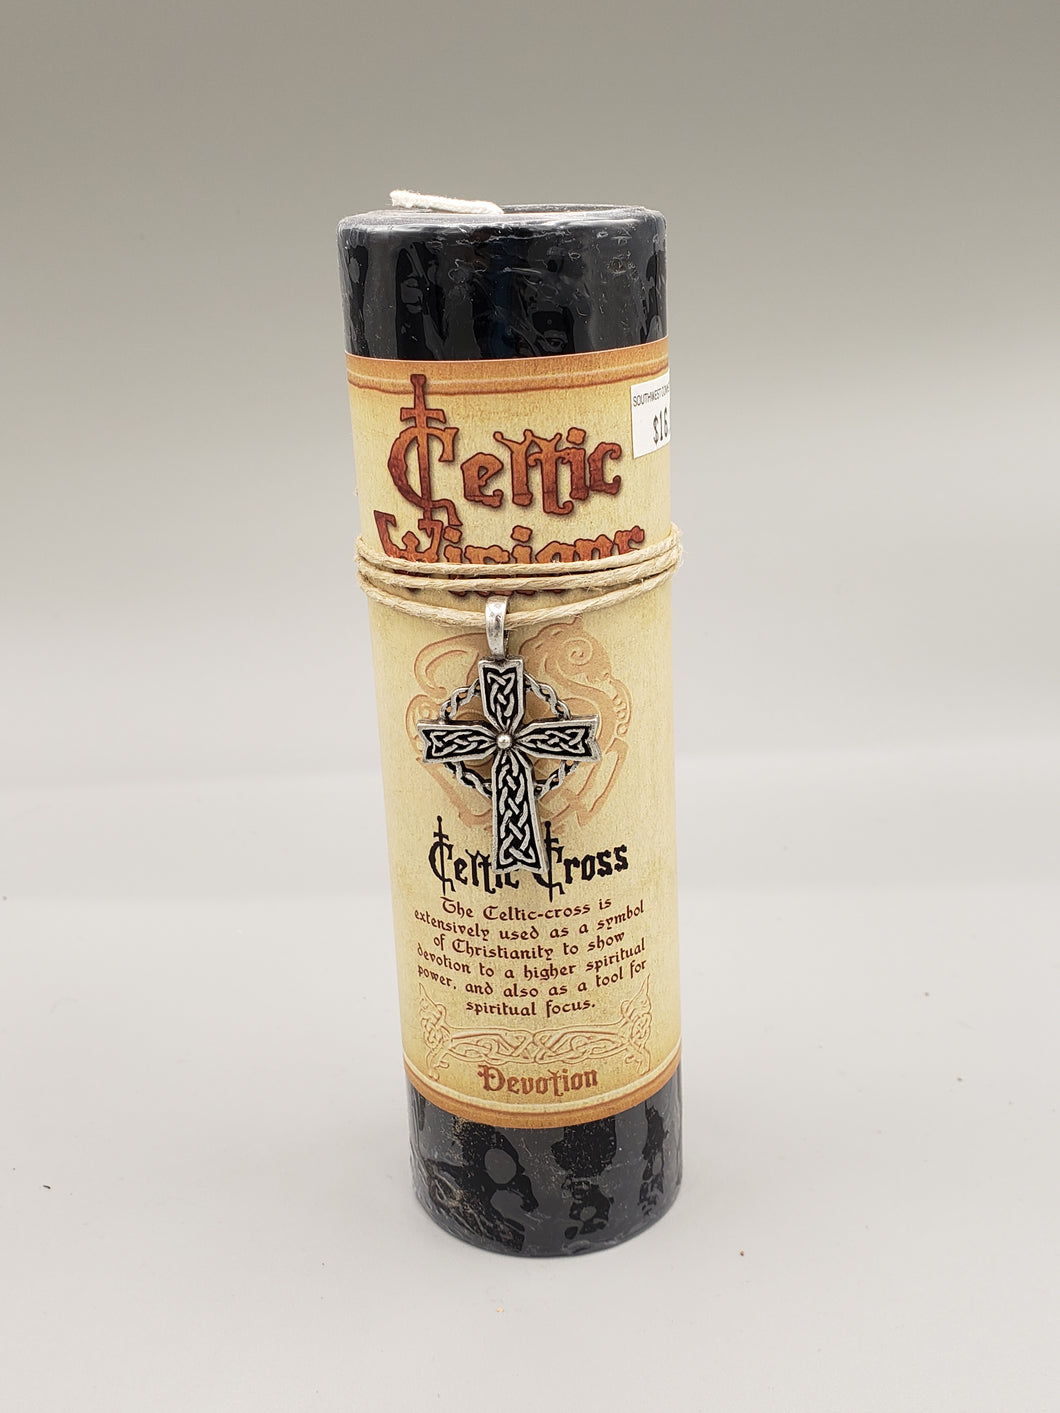 CELTIC VISIONS CANDLE SERIES - CELTIC CROSS